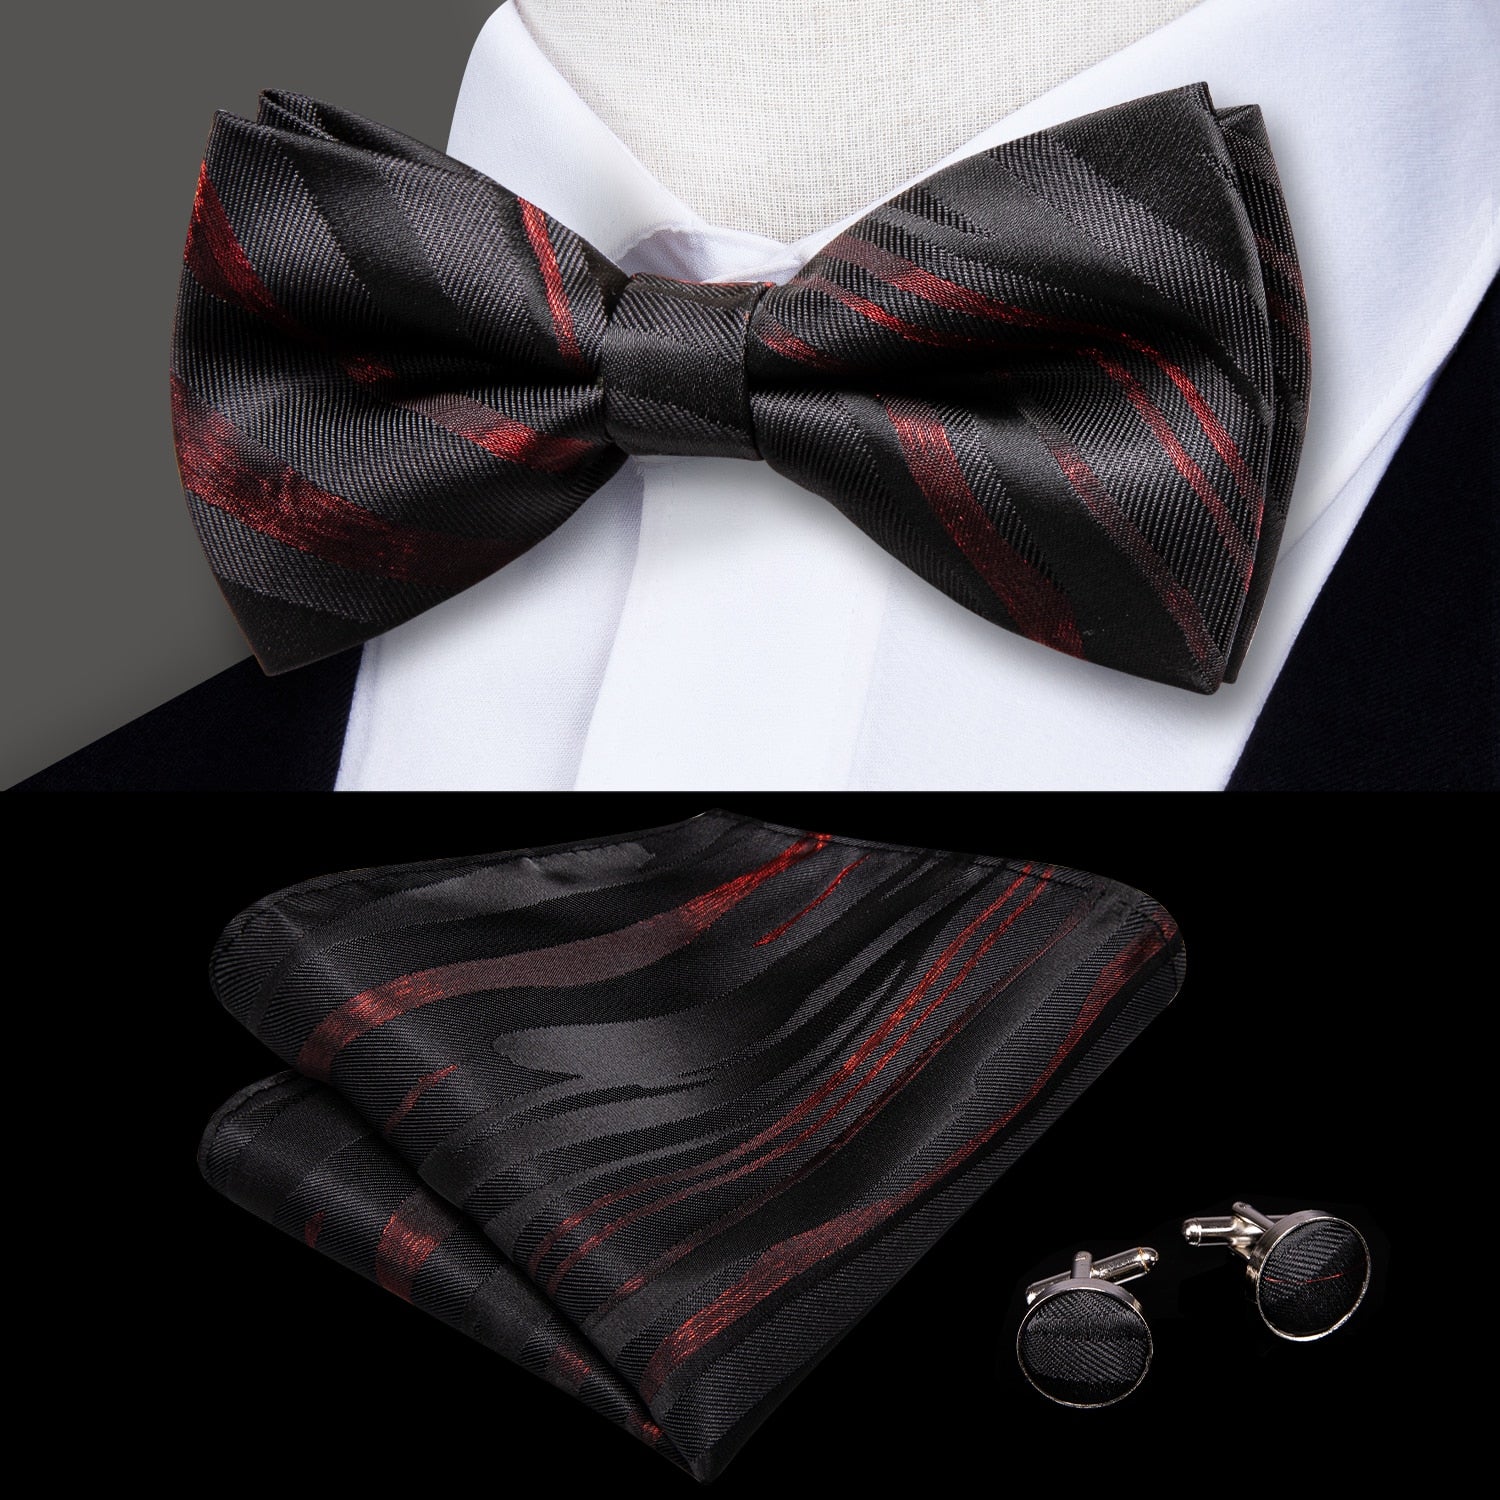 Hi-Tie Classic Black Bow Ties for Men 100% Silk Butterfly Pre-Tied Bow Tie Pocket Square Cufflinks Suit Set Floral Gold Bowties - Bekro's ART